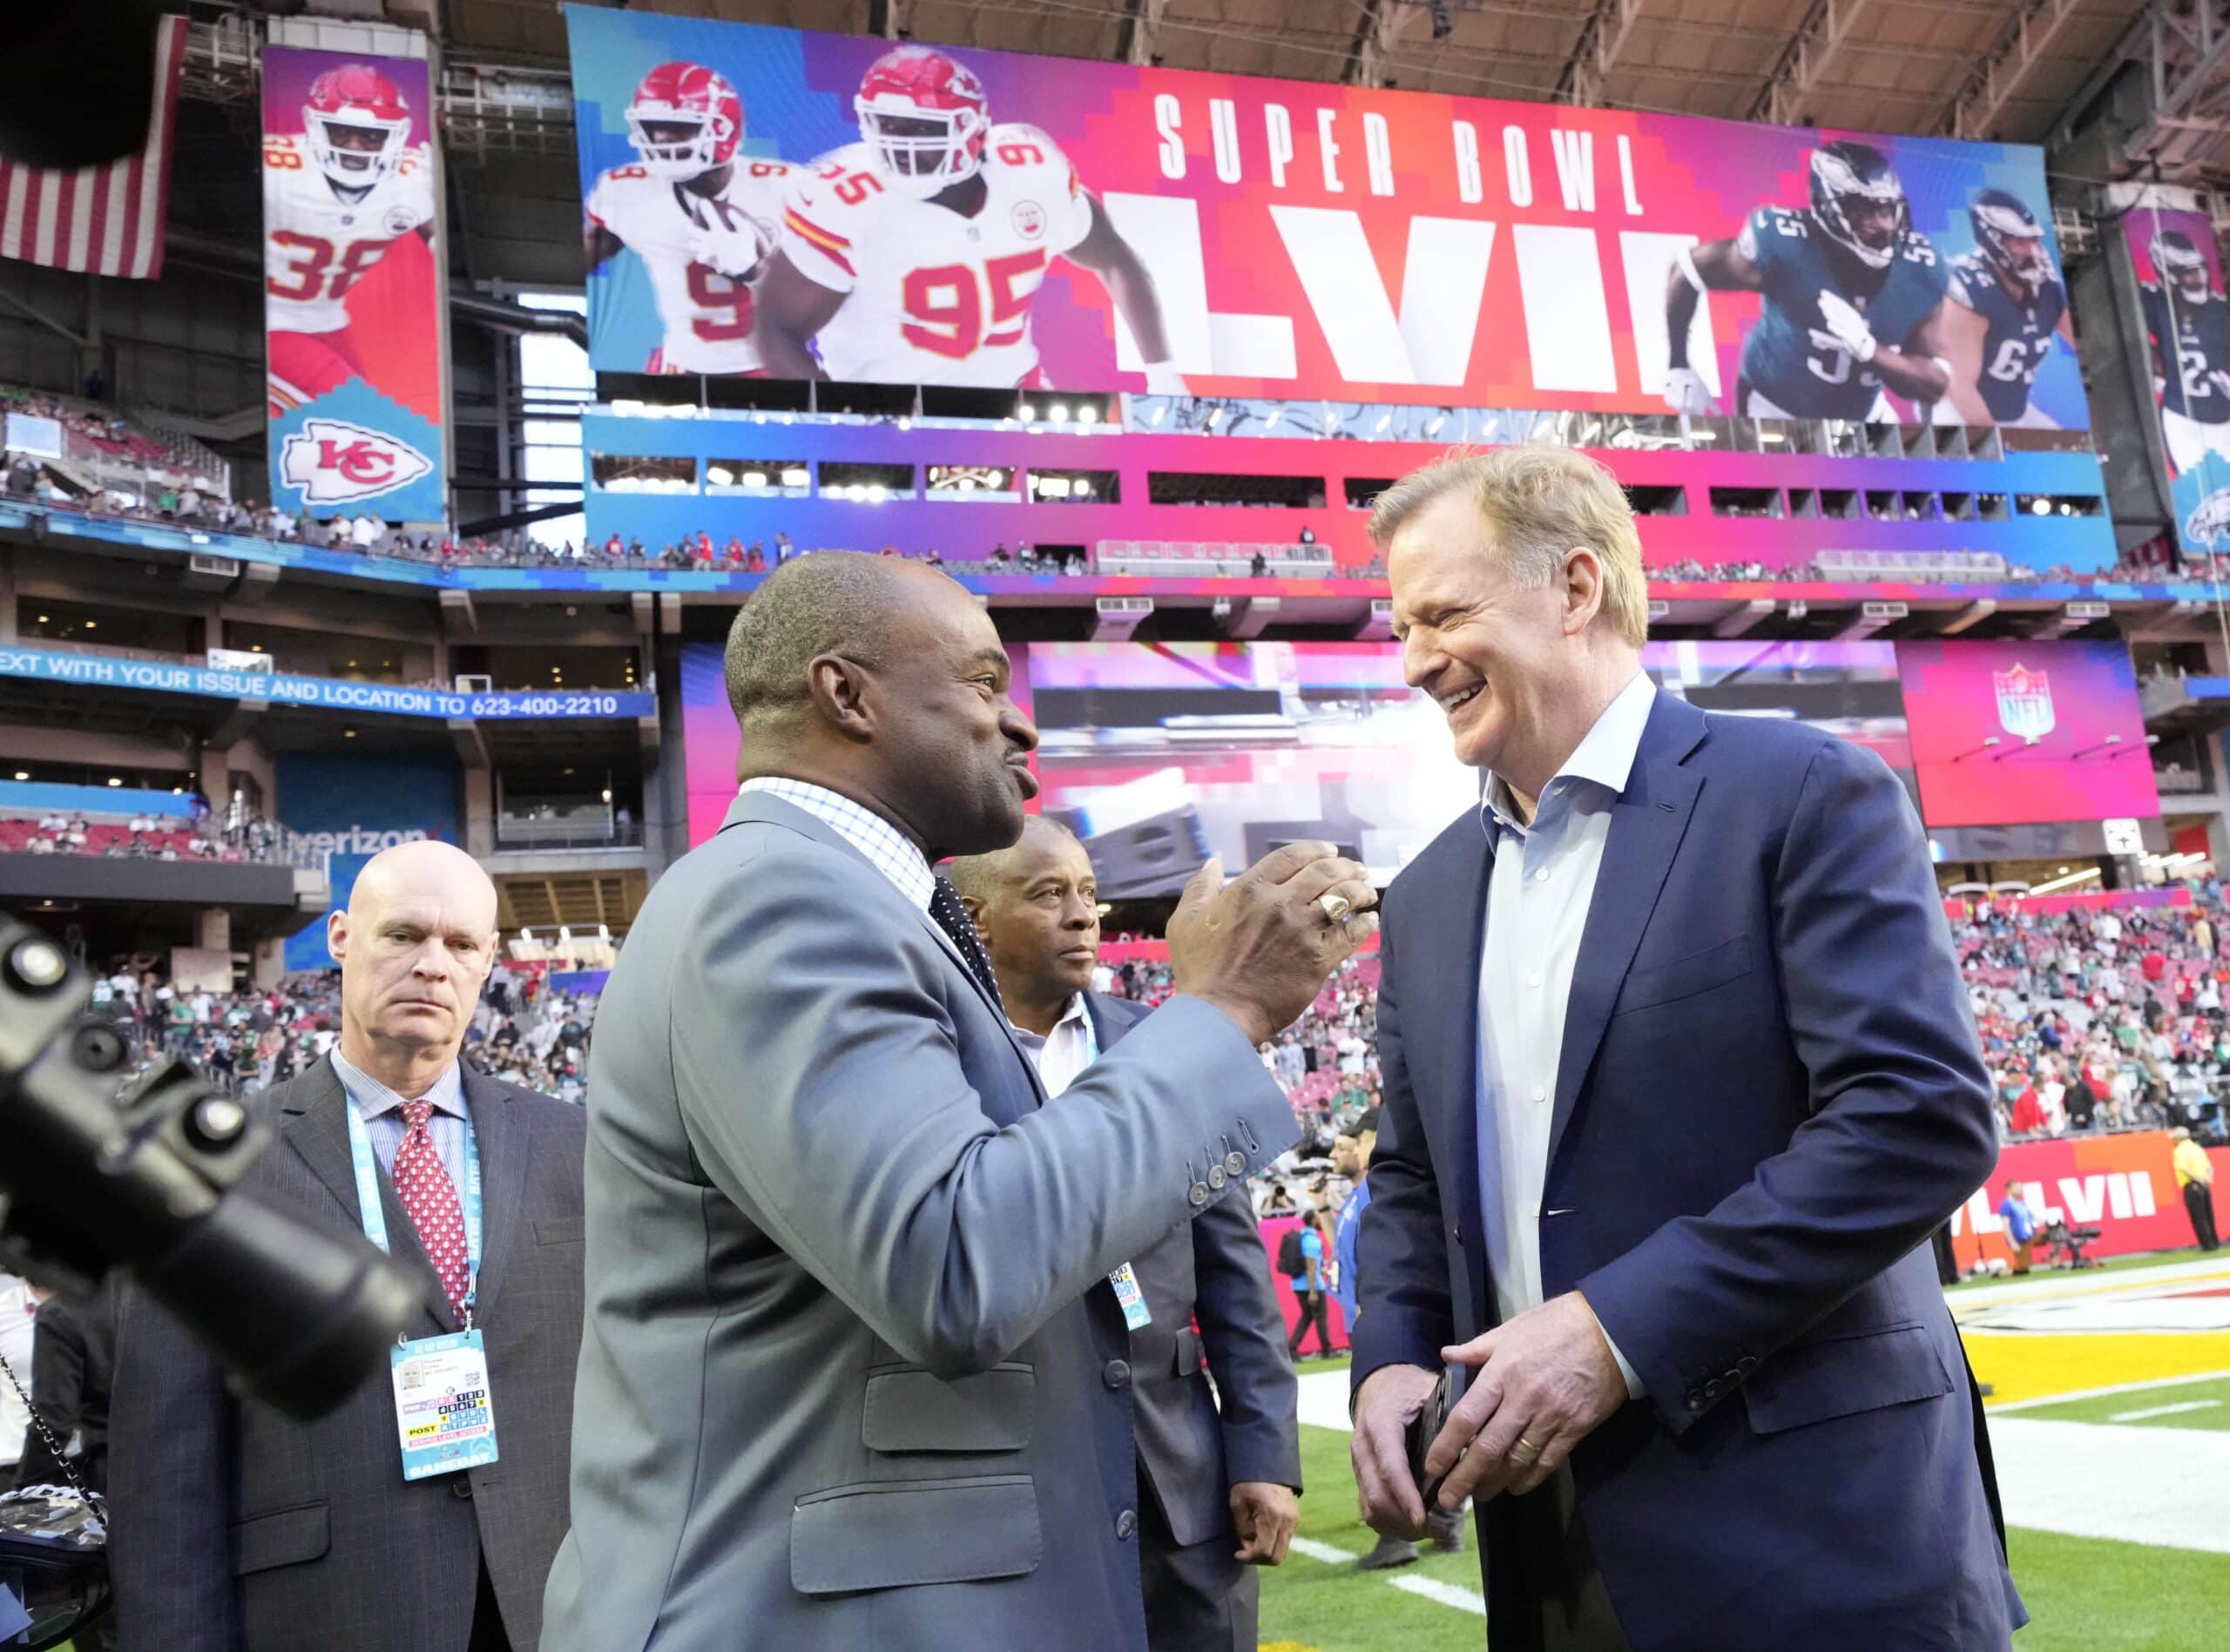 DeMaurice Smith's era as NFLPA President is nearing an end.